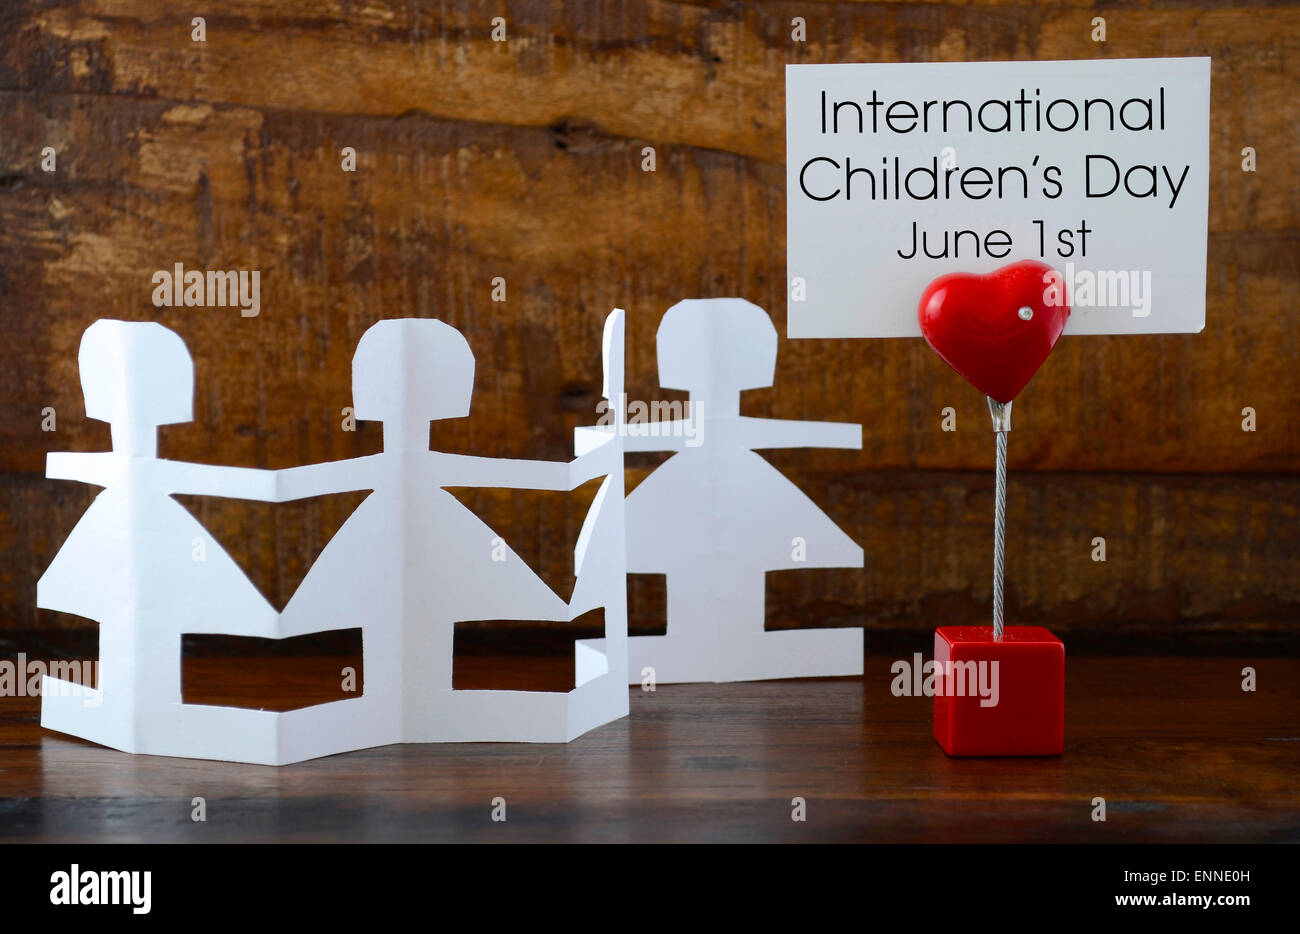 International Childrens Day concept with paper dolls on dark wood background, with message on red heart sign. Stock Photo